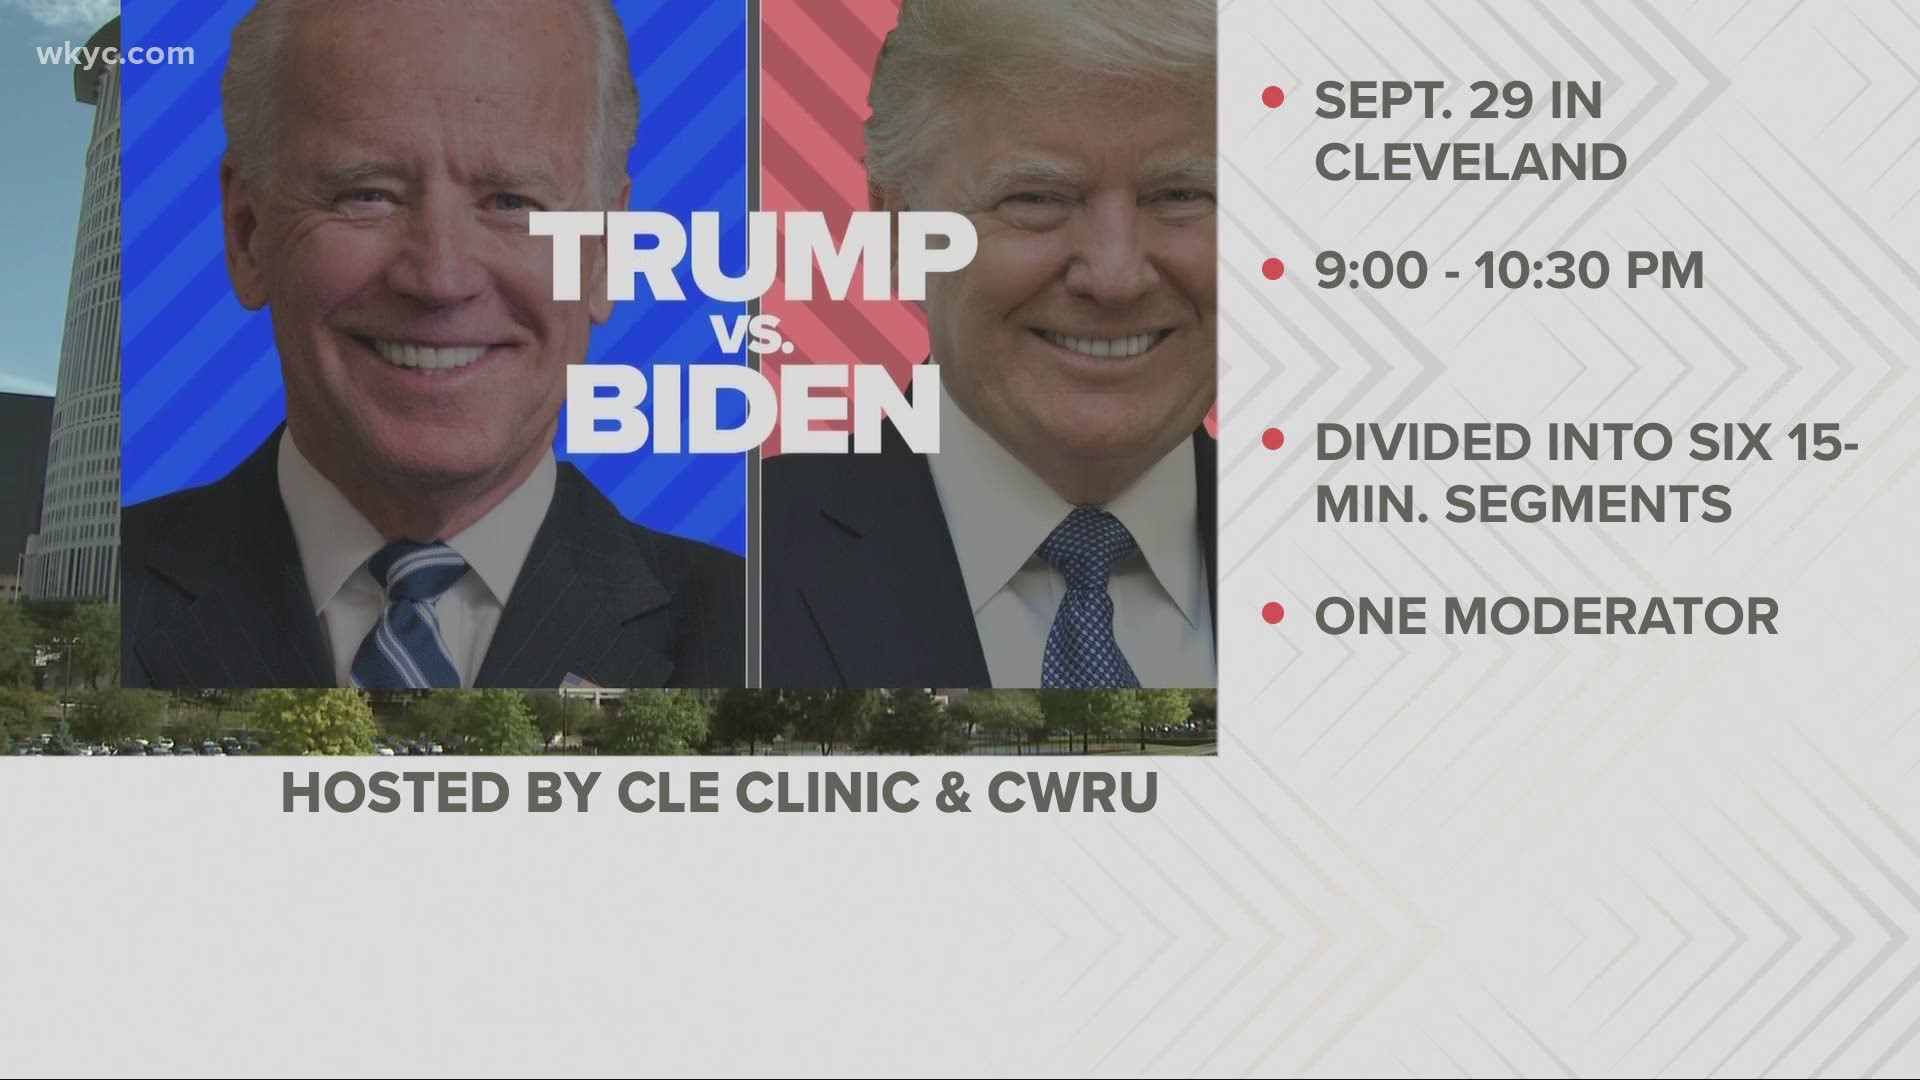 The debate will take place in Cleveland September 29. The debate will be 90 minutes long and go from 9 to 10:30 p-m. It will be divided into six, 15-minute segments.